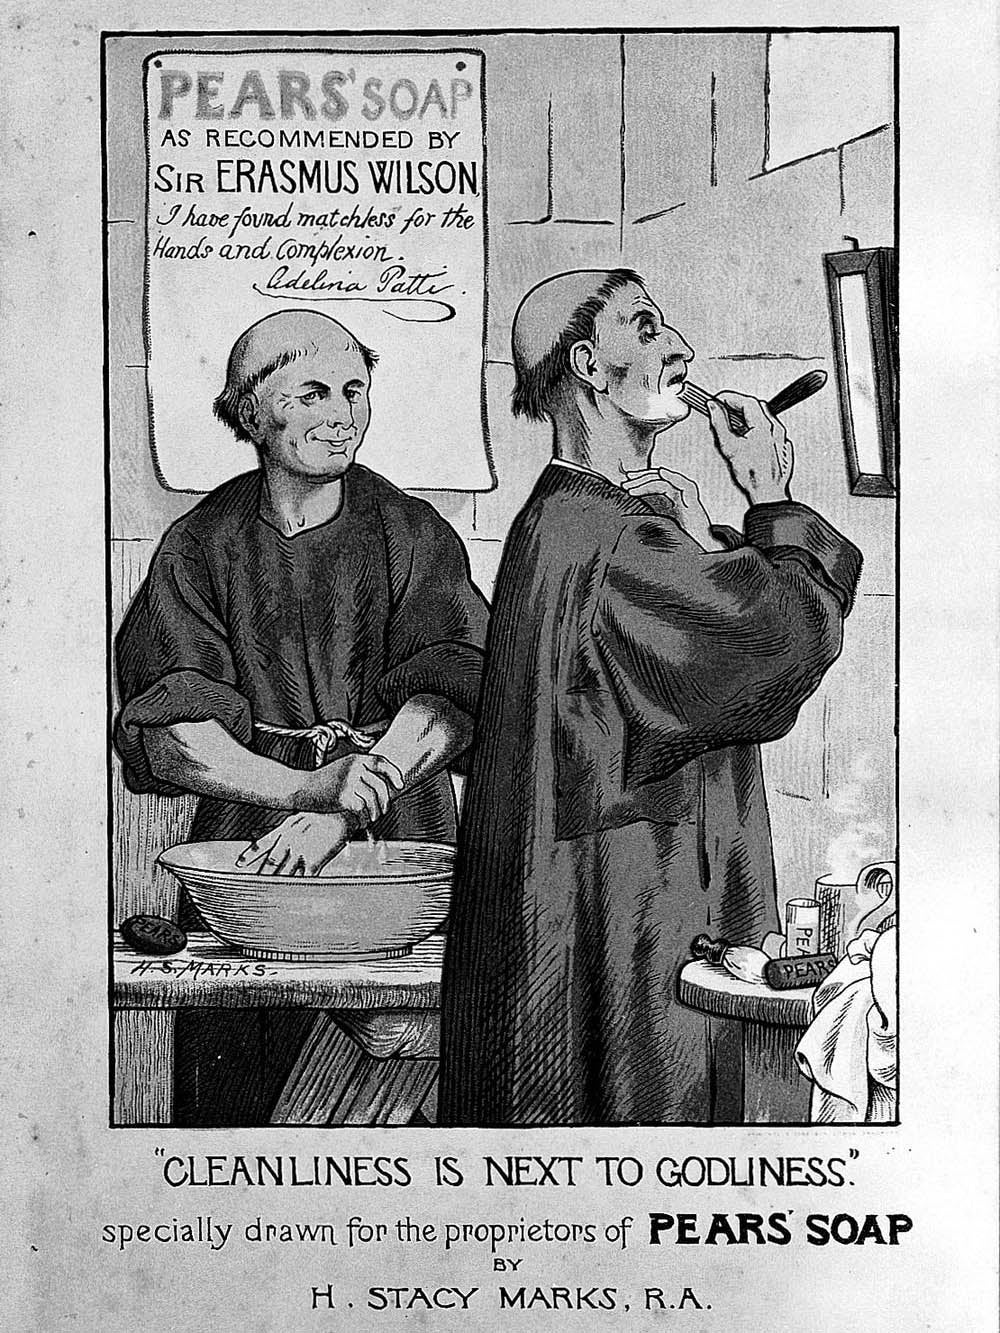 Nineteenth-century Pears soap advert (Wellcome Collection)